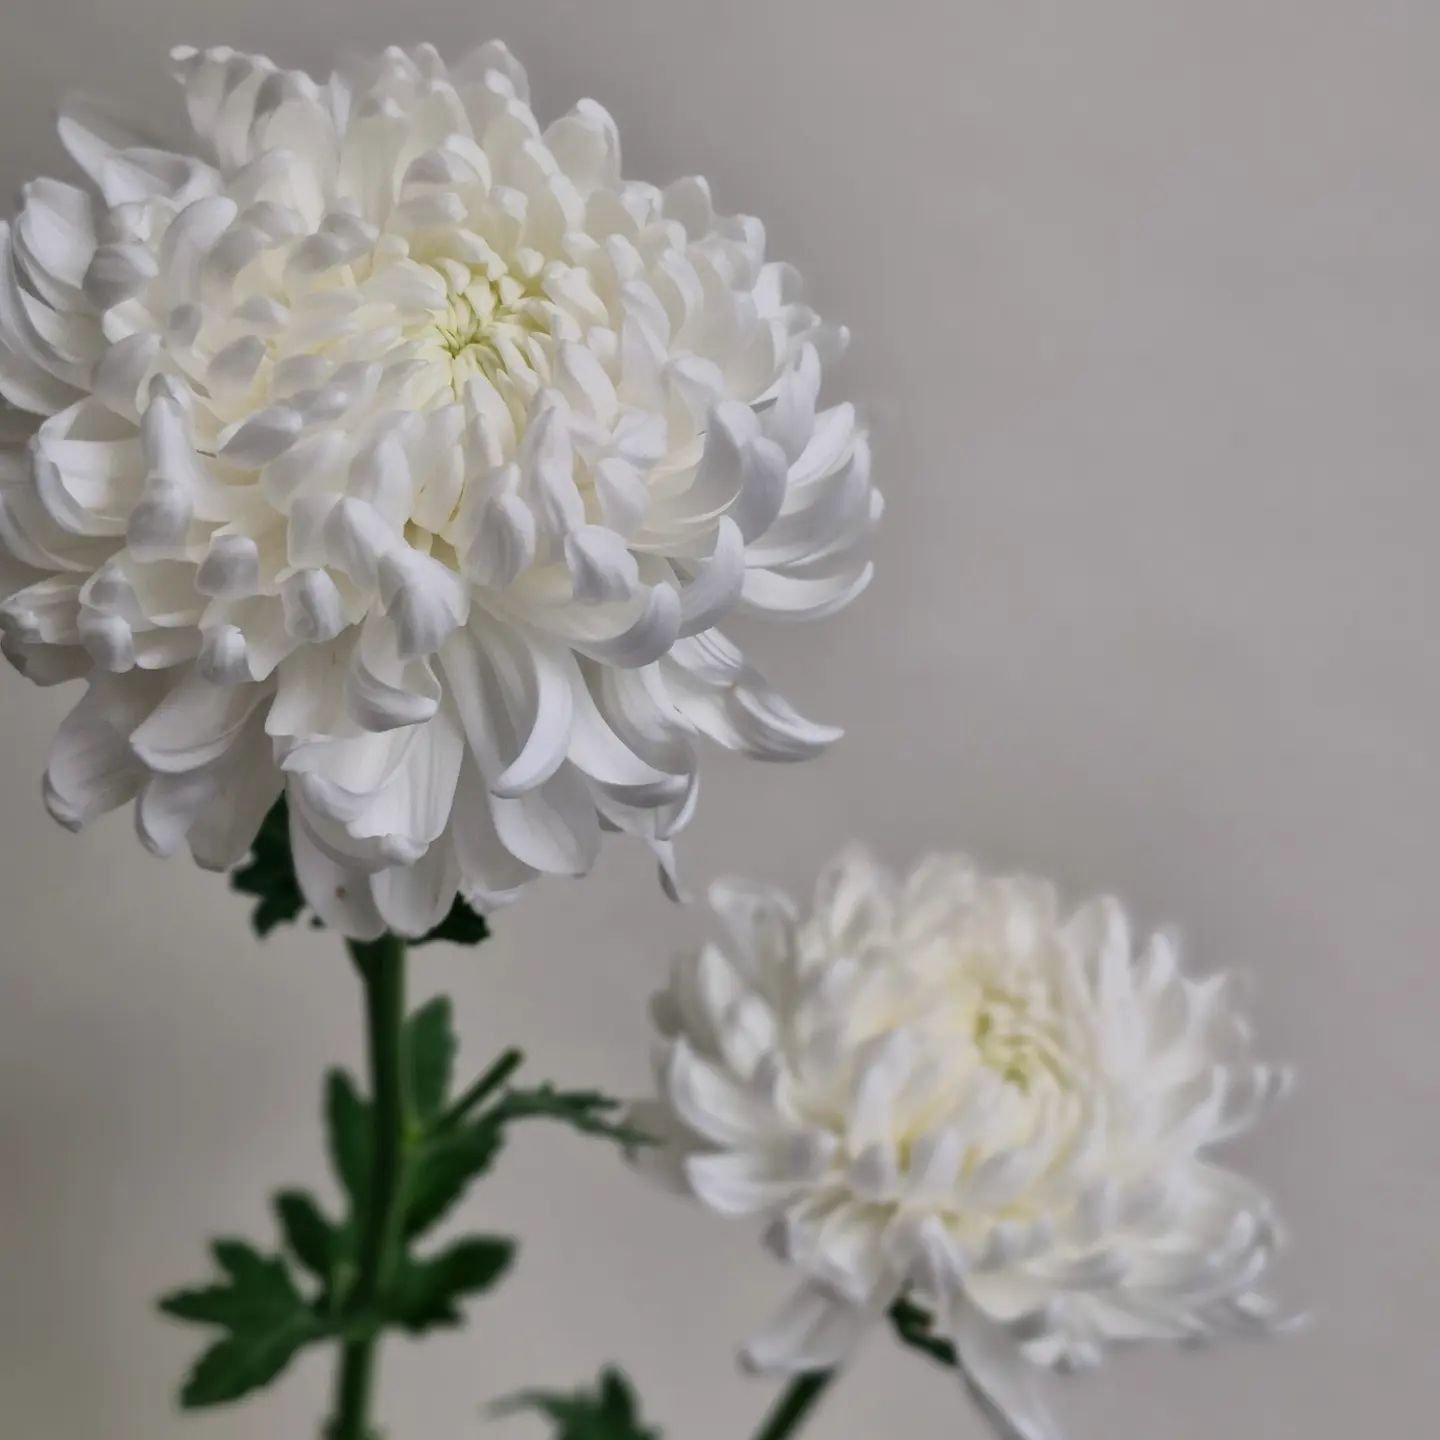 Cloud chrysanthemums are back!
Graduating in the next few weeks? Make sure you order early x